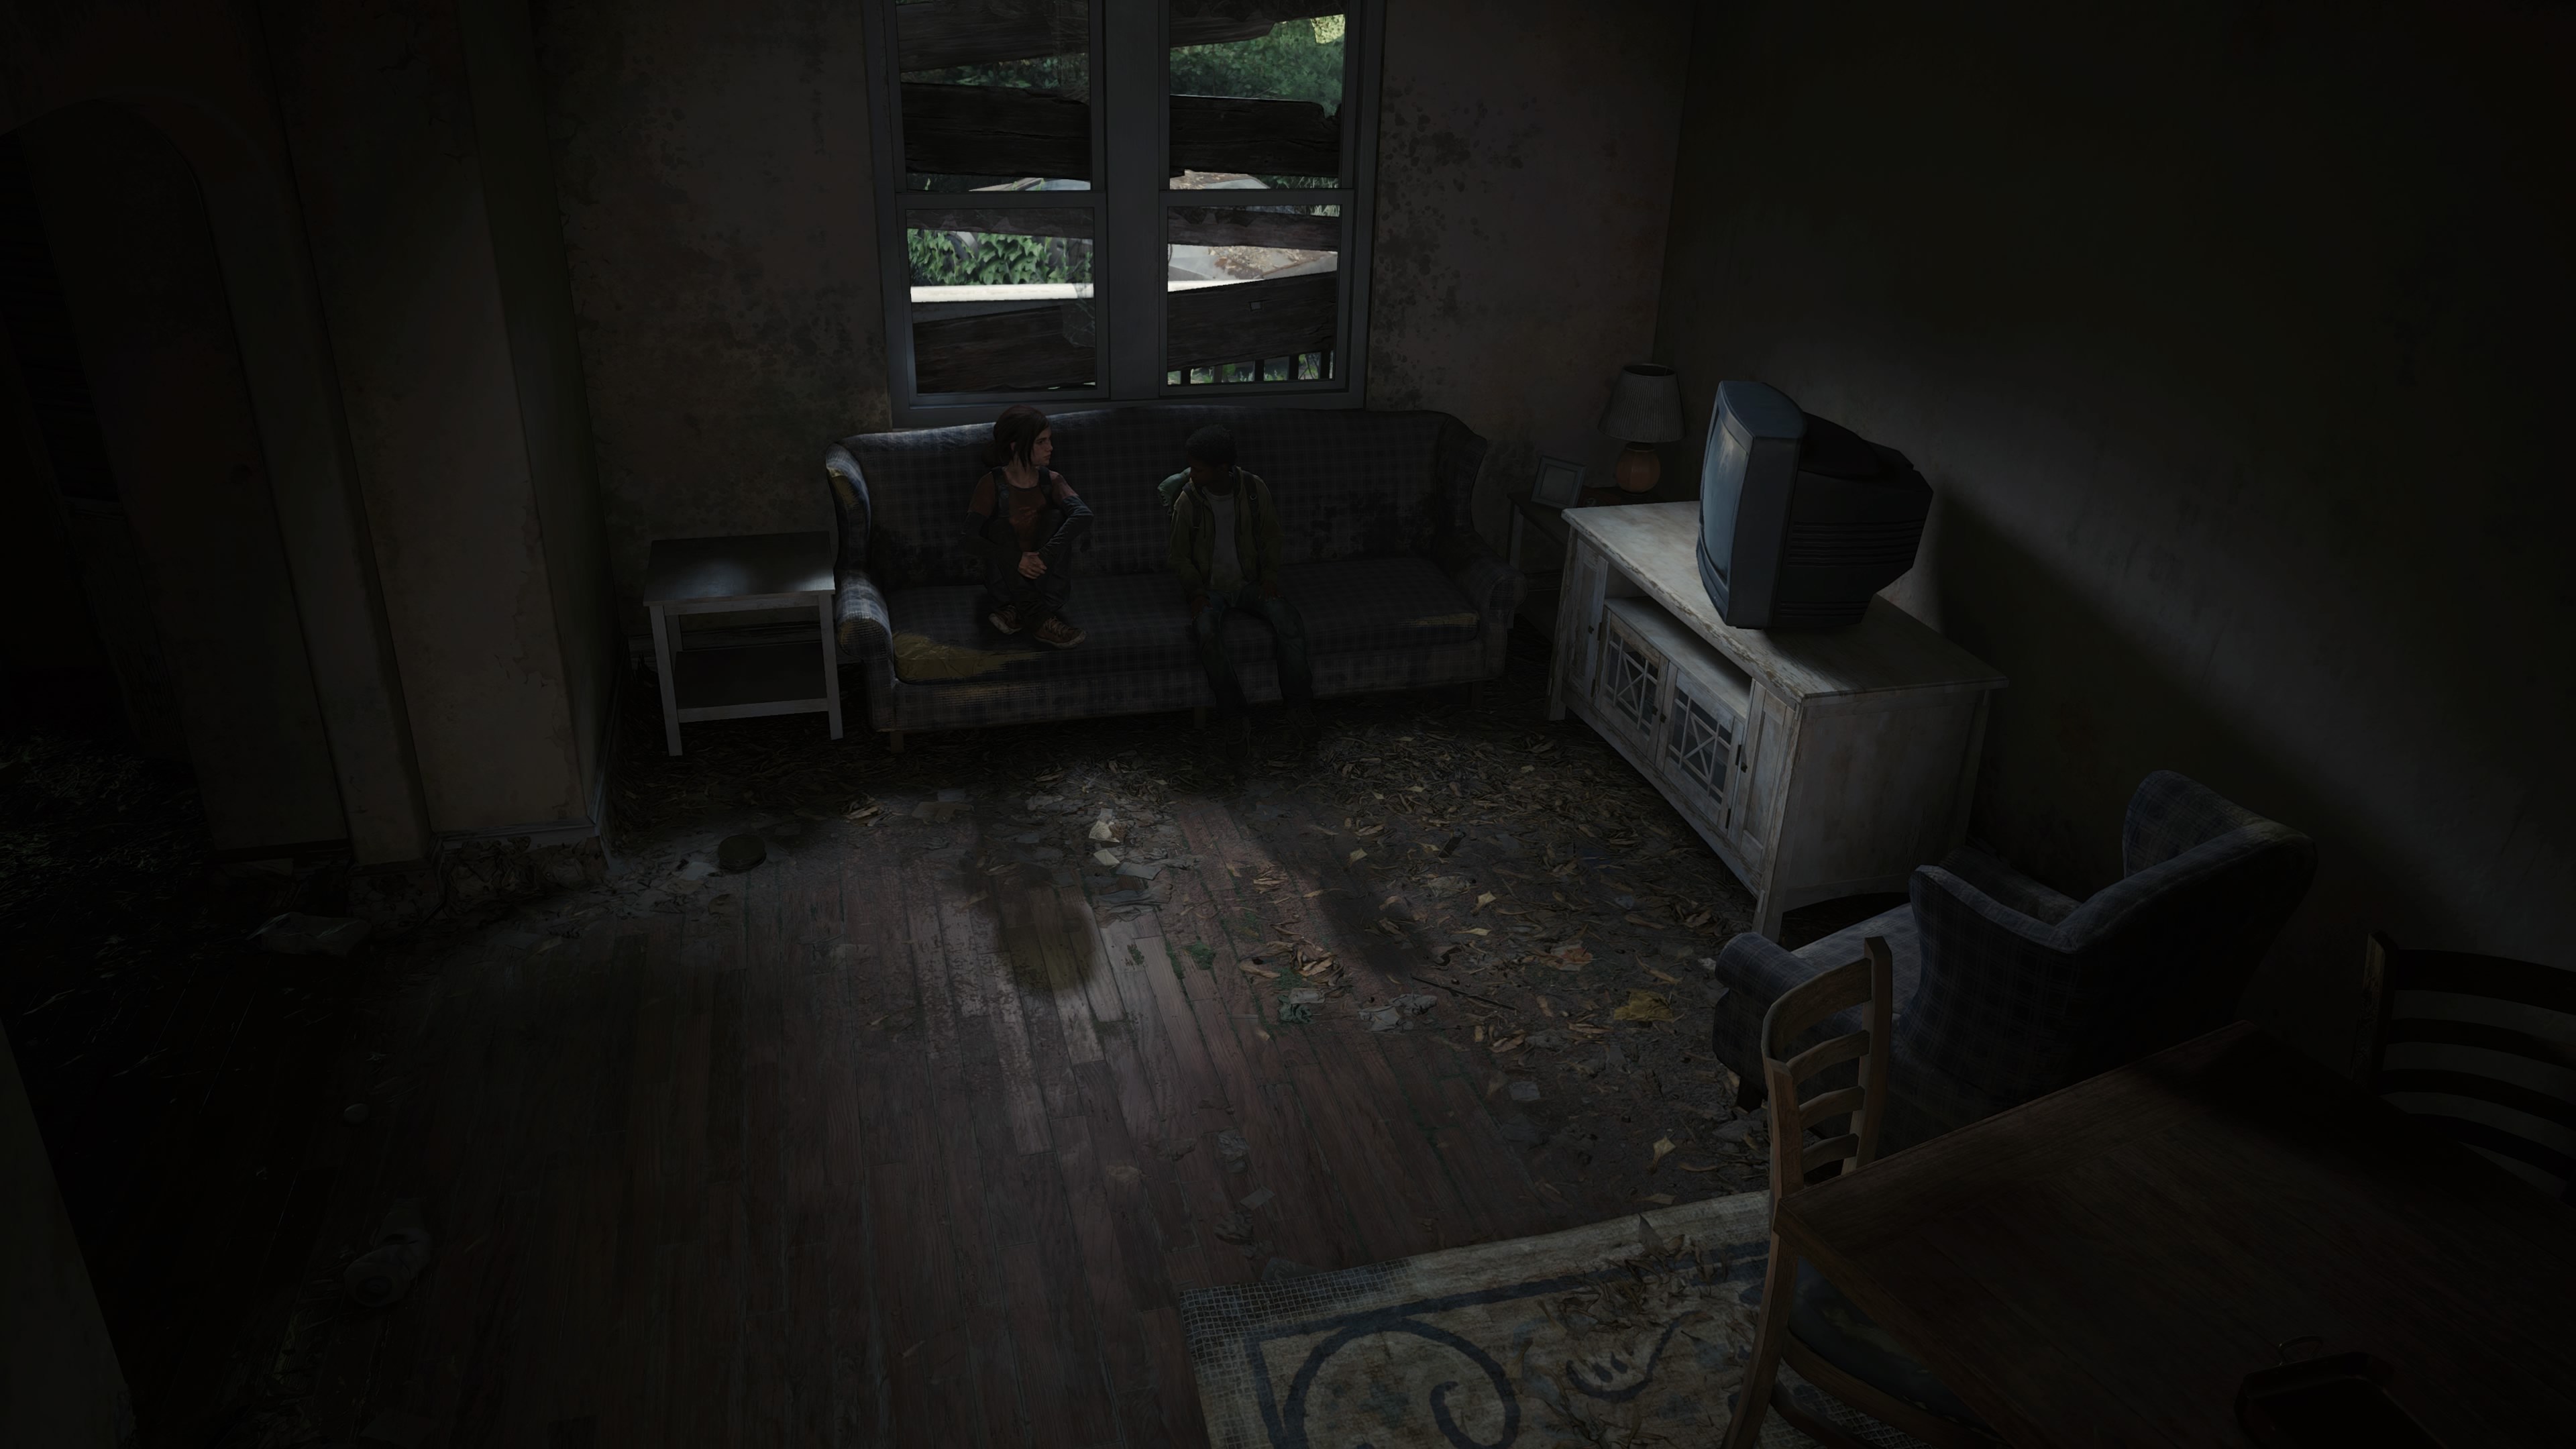 The Last Of Us Ellie Williams Naughty Dog PlayStation Playstation 5 Video Game Art Screen Shot Video 3840x2160